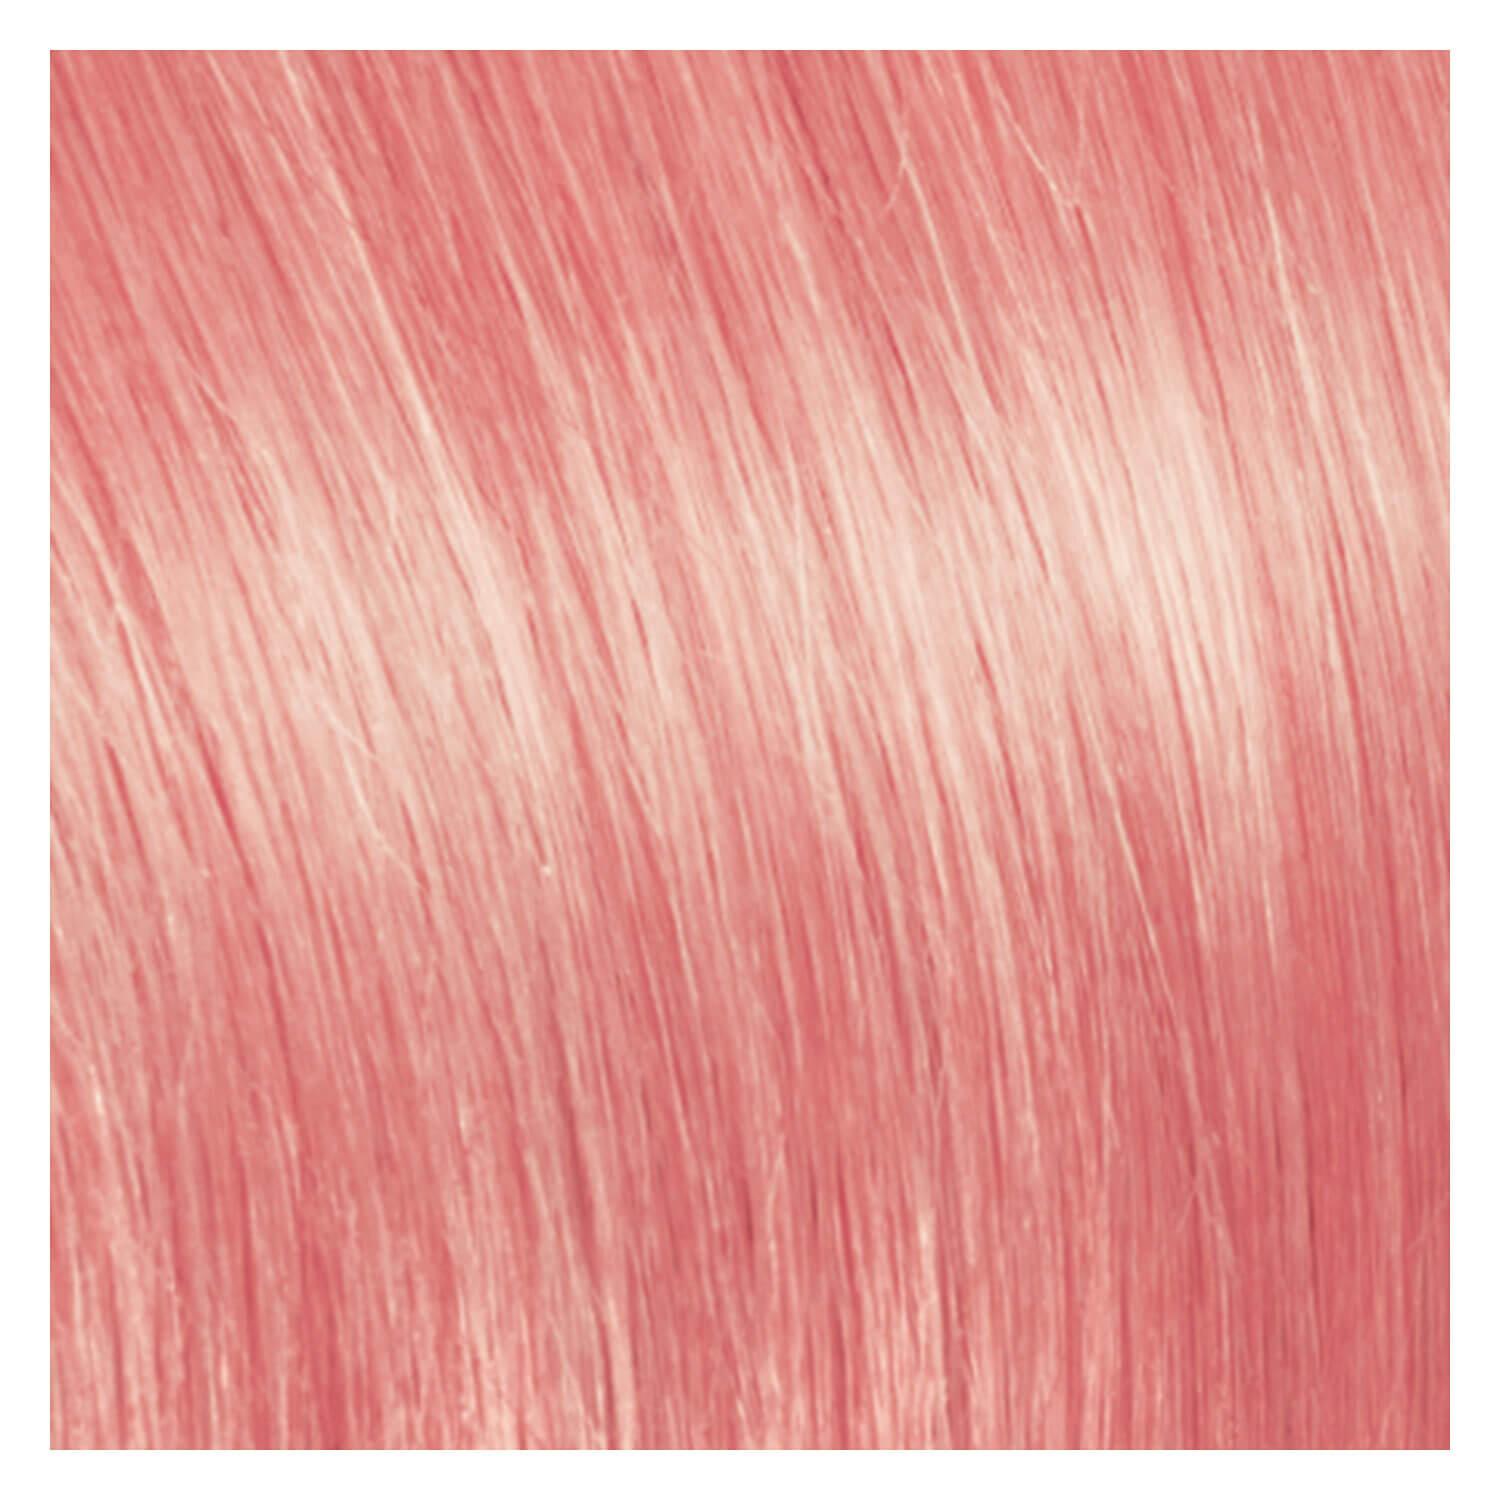 SHE Clip In-System Hair Extensions - Rose 40cm